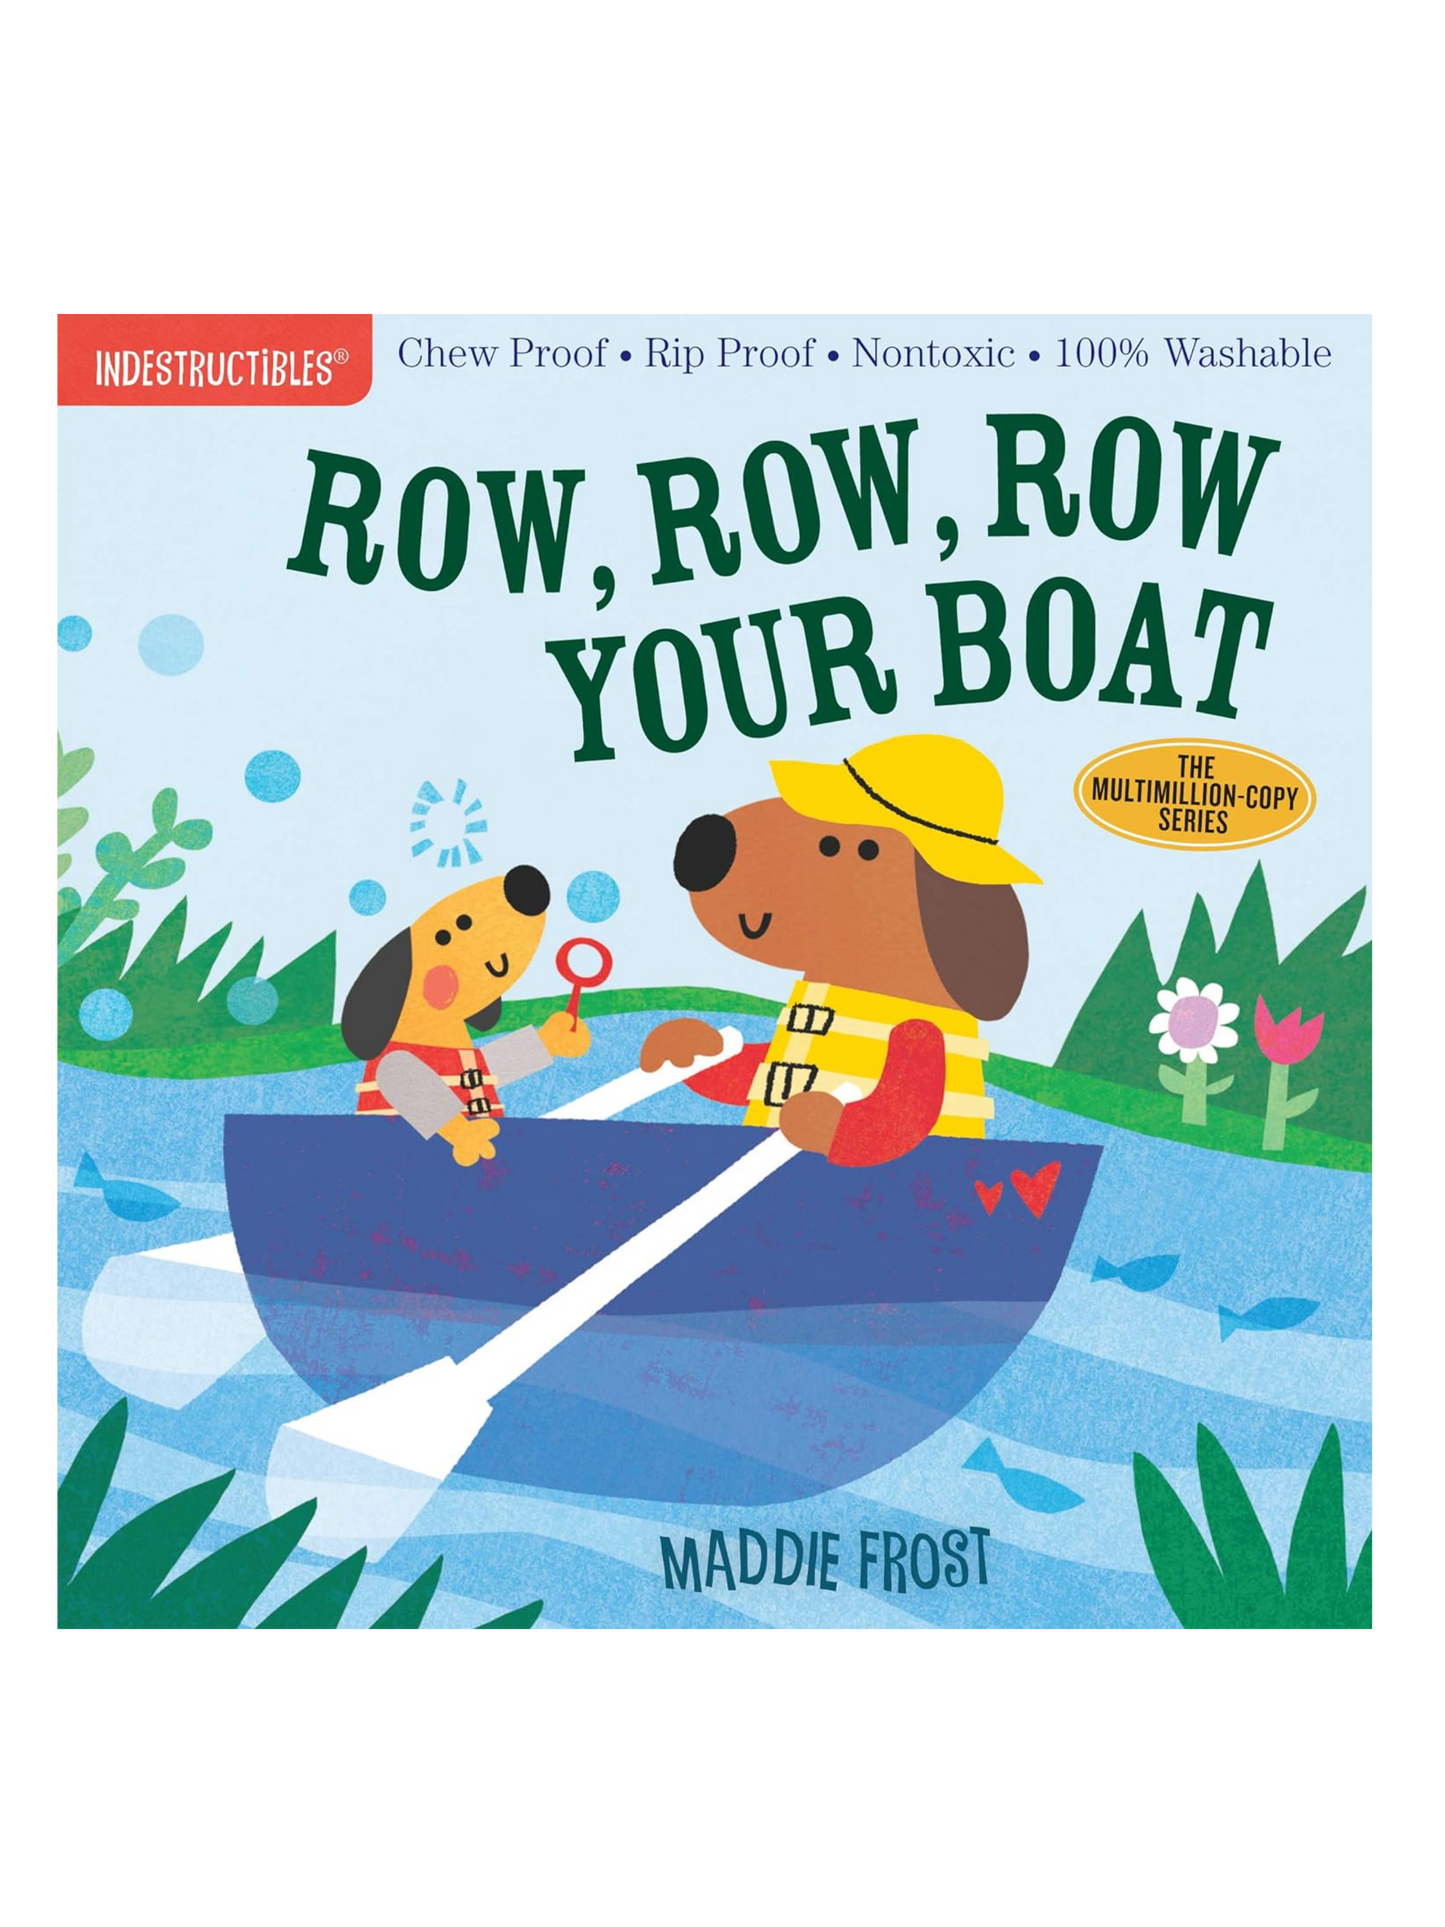 ROW ROW ROW YOUR BOAT THE ORIGINAL INDESTRUCTIBLES BOOKS - THE LITTLE EAGLE BOUTIQUE